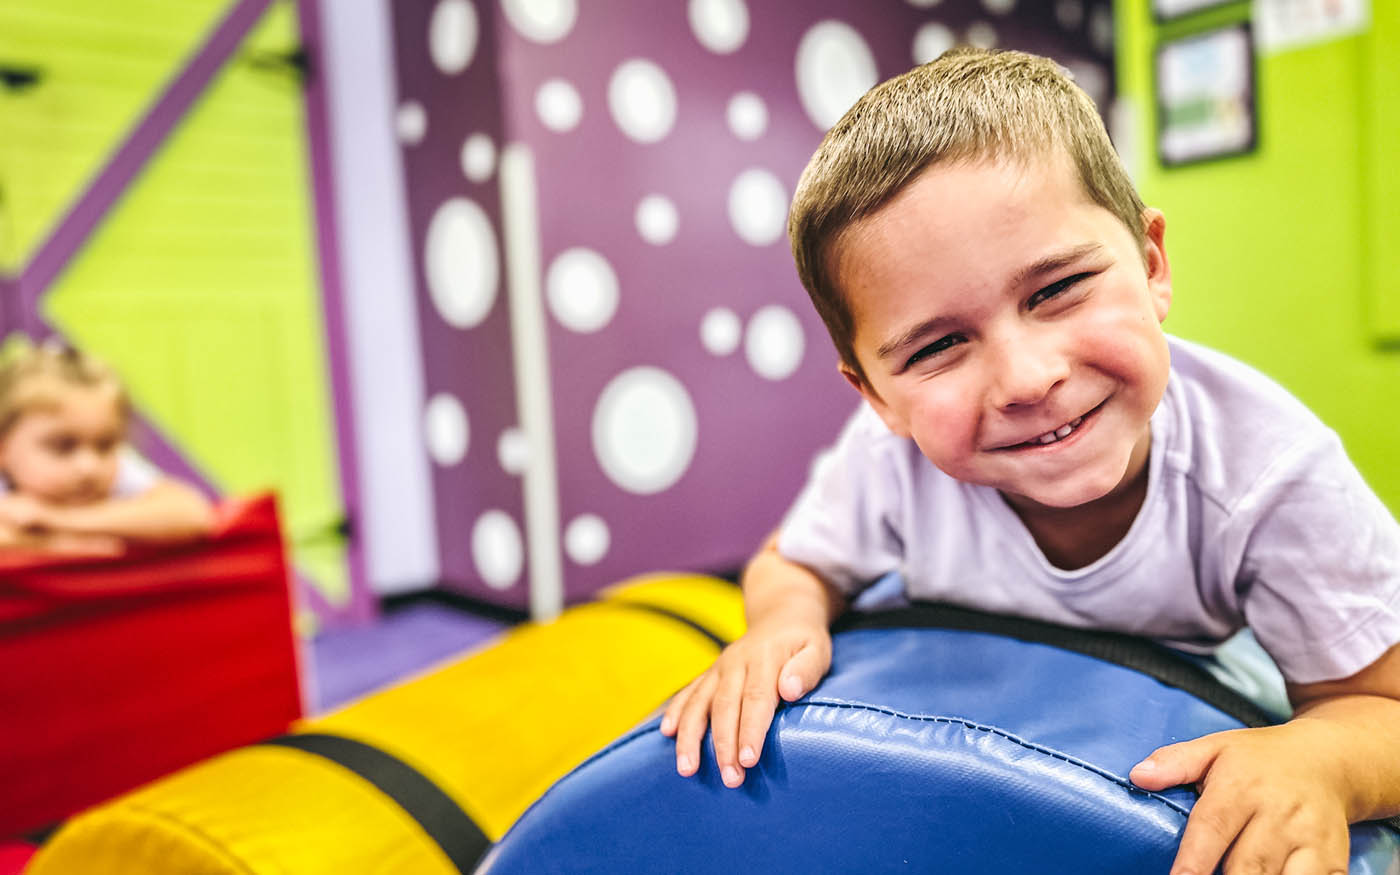 A little boy smiles at the camera as he plays on a soft piece of gym equipment at Romp n' Roll.